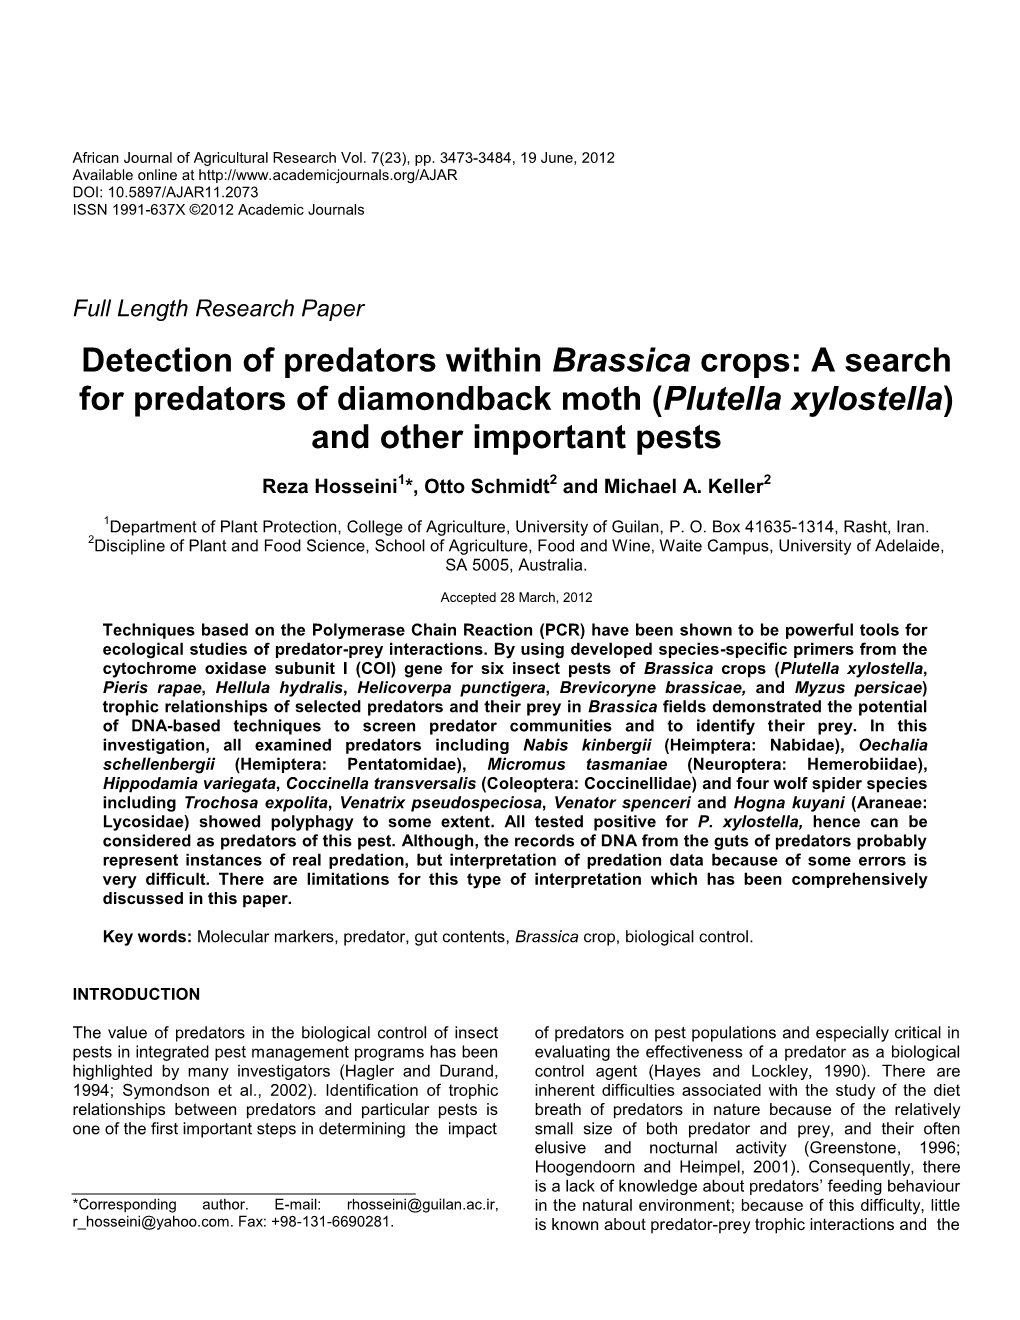 Detection of Predators Within Brassica Crops: a Search for Predators of Diamondback Moth (Plutella Xylostella) and Other Important Pests